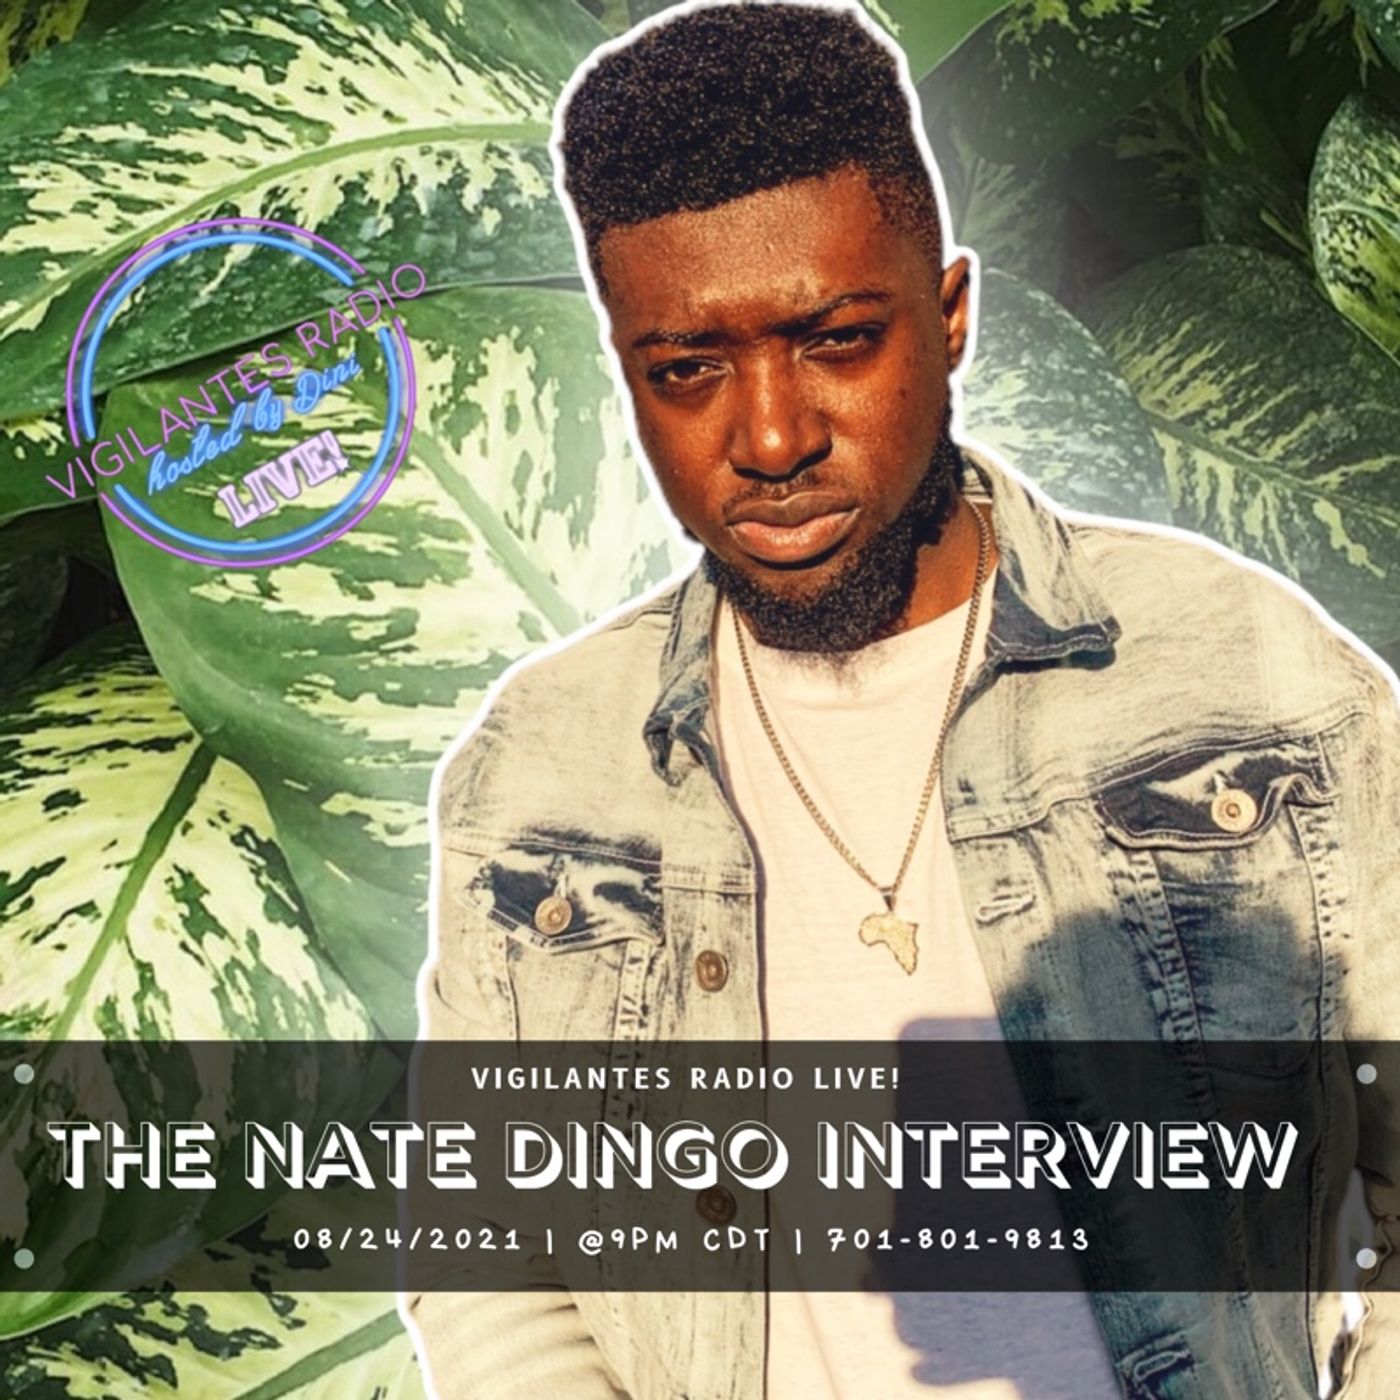 The Nate Dingo Interview. Image